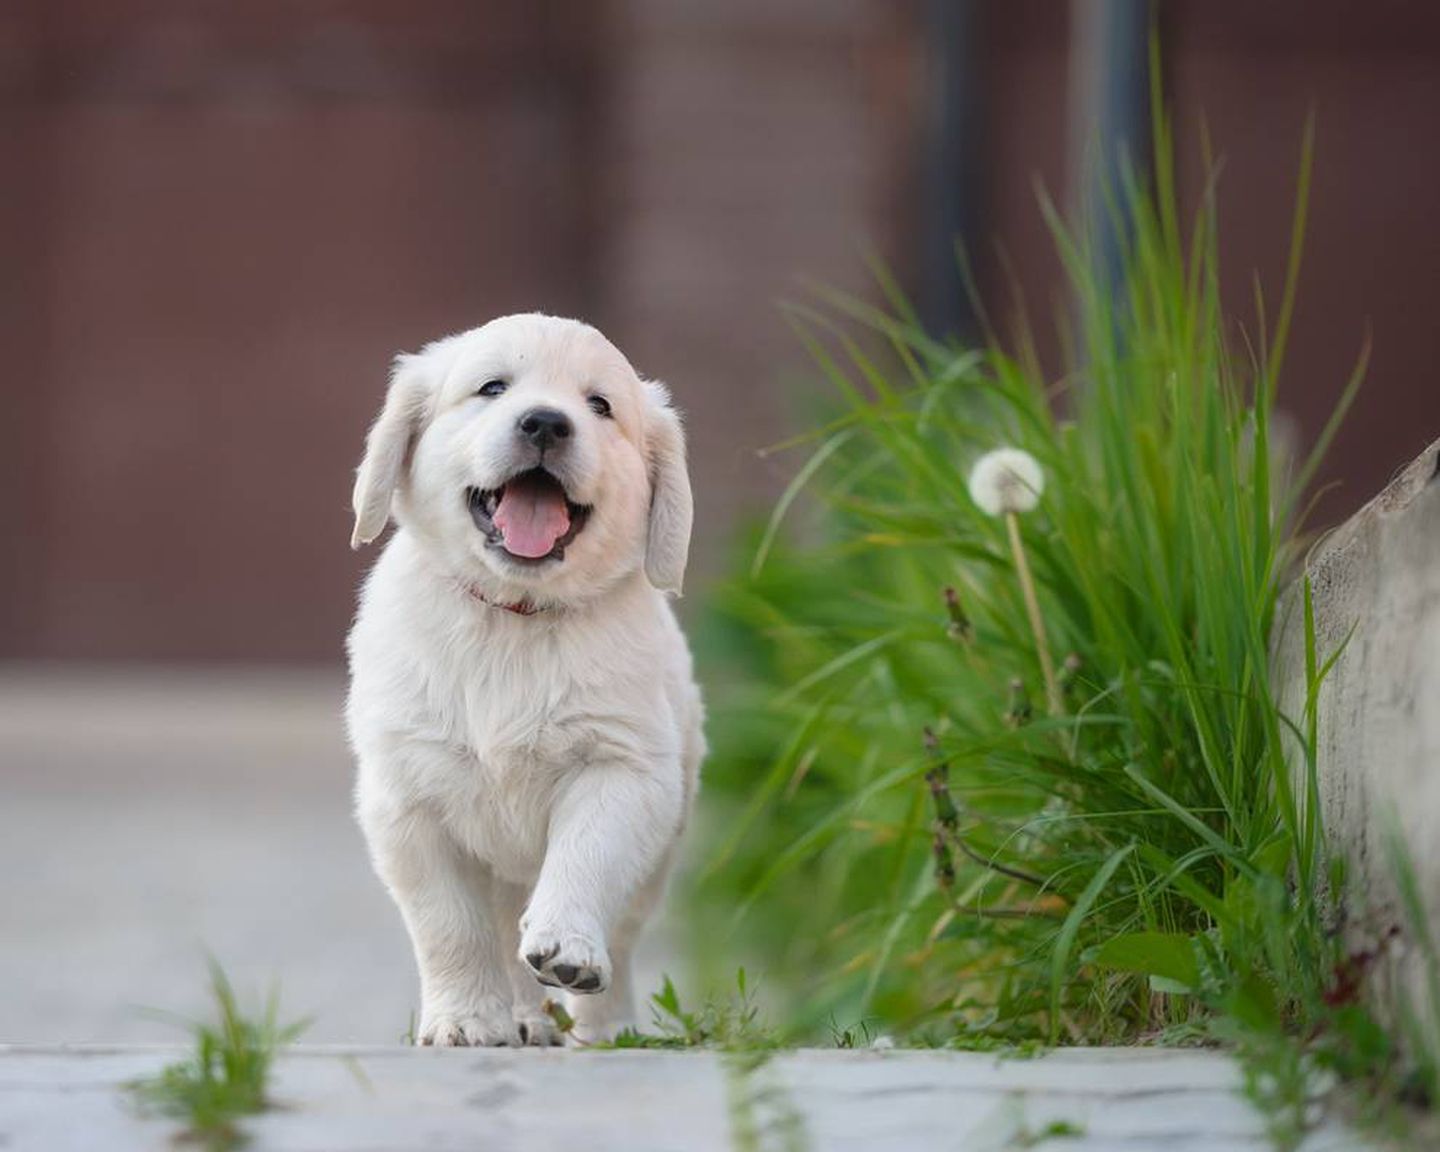 Happy National Puppy Day!. MNN Nature Network